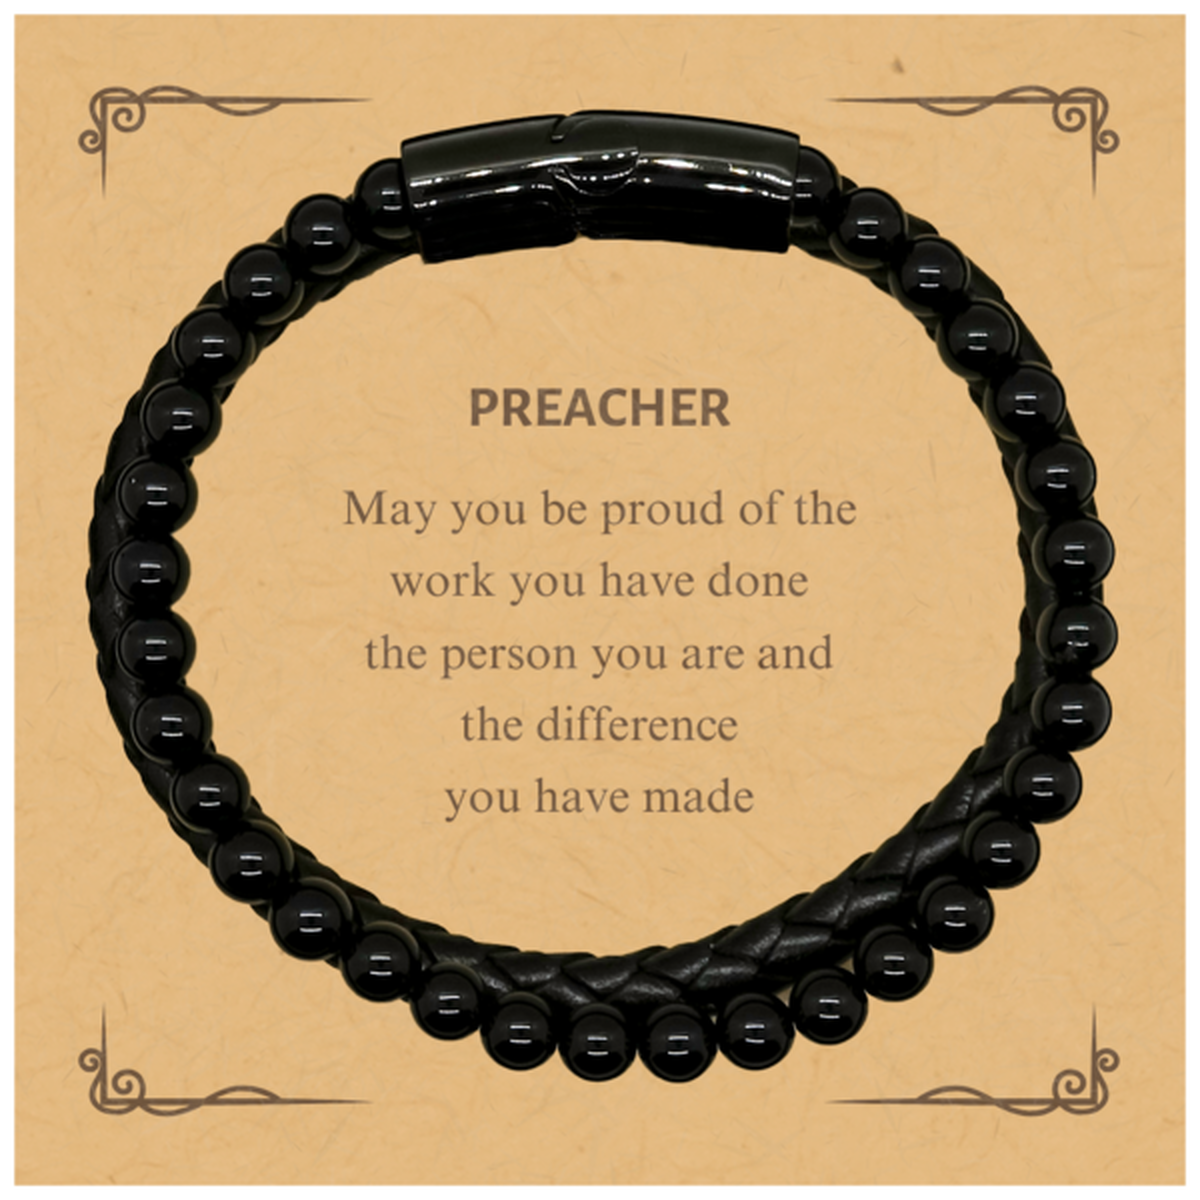 Preacher May you be proud of the work you have done, Retirement Preacher Stone Leather Bracelets for Colleague Appreciation Gifts Amazing for Preacher